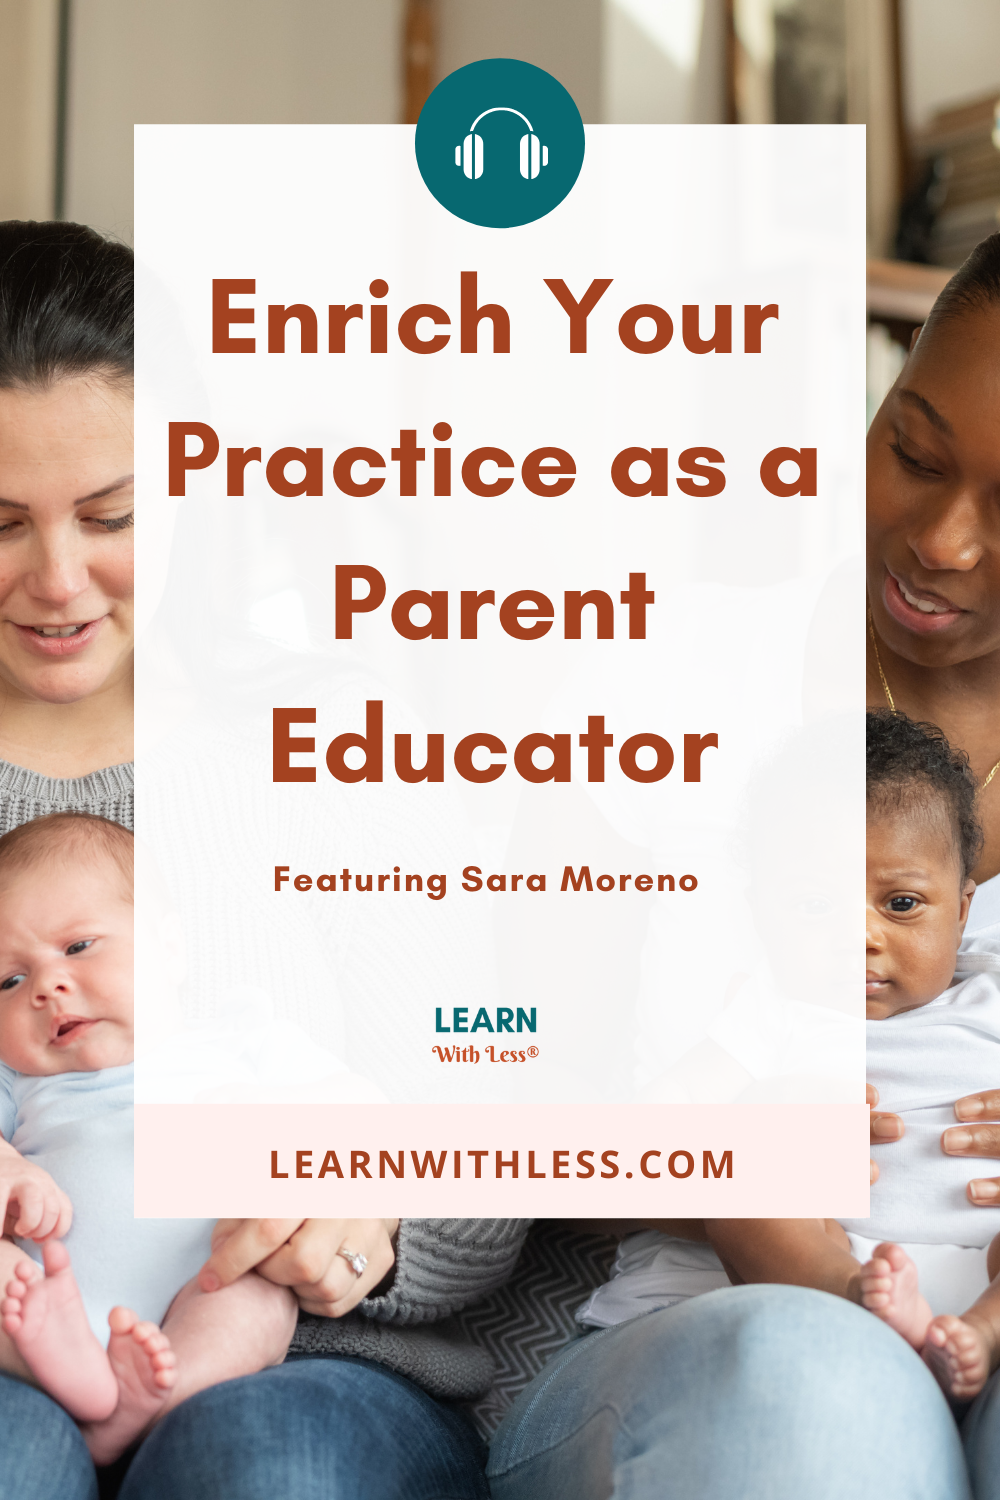 Enrich Your Practice as a Parent Educator, with Sara Moreno